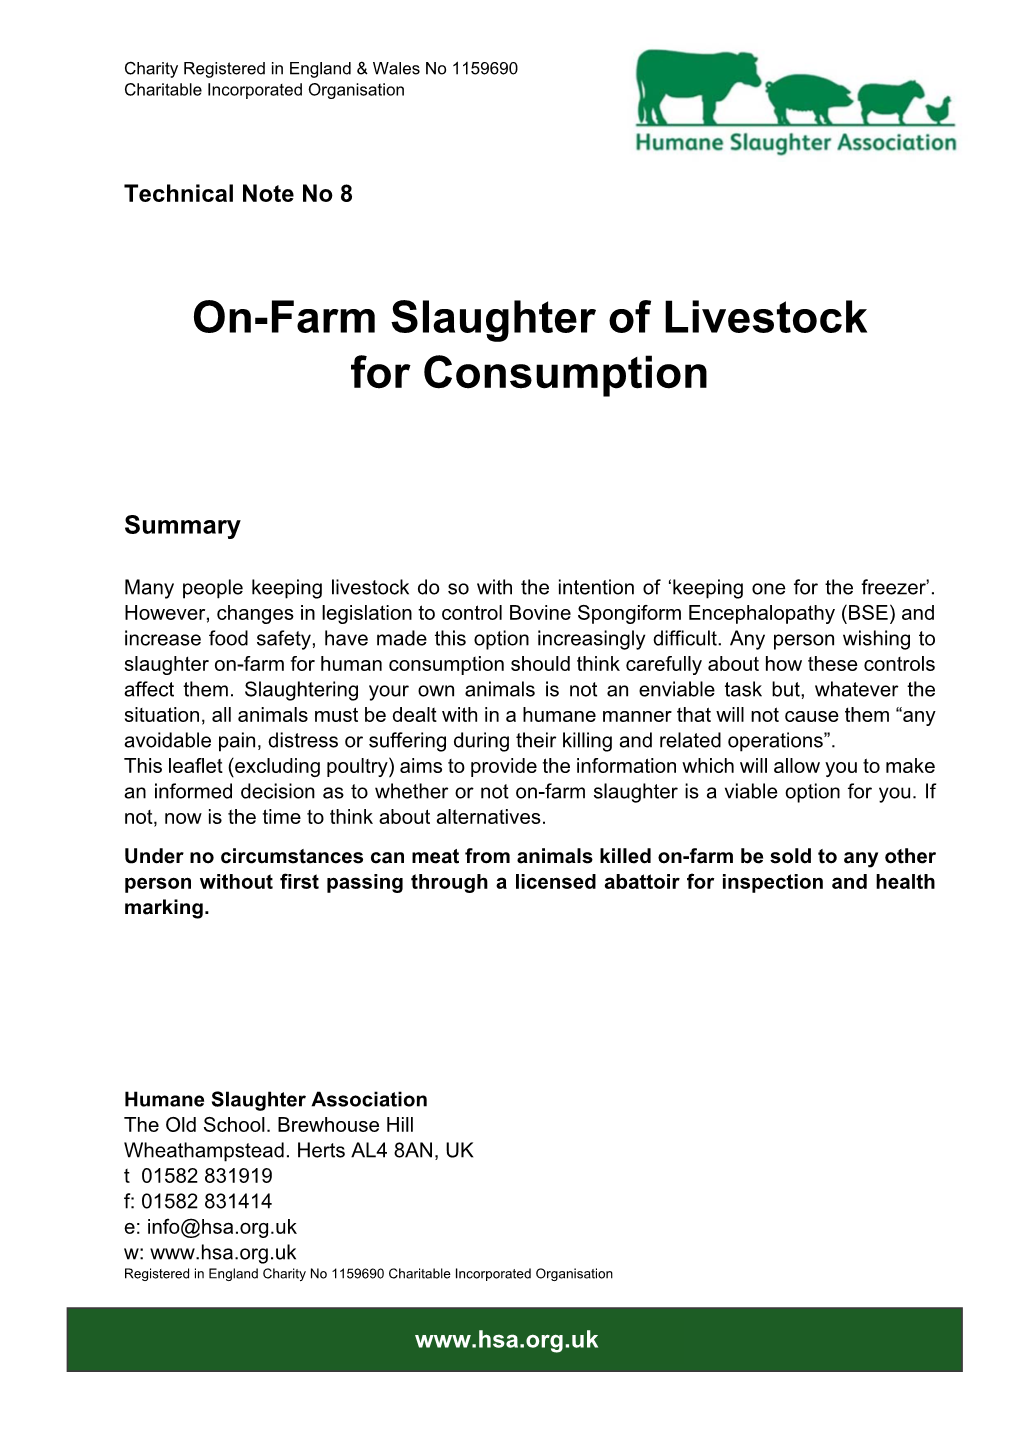 On-Farm Slaughter of Livestock for Consumption